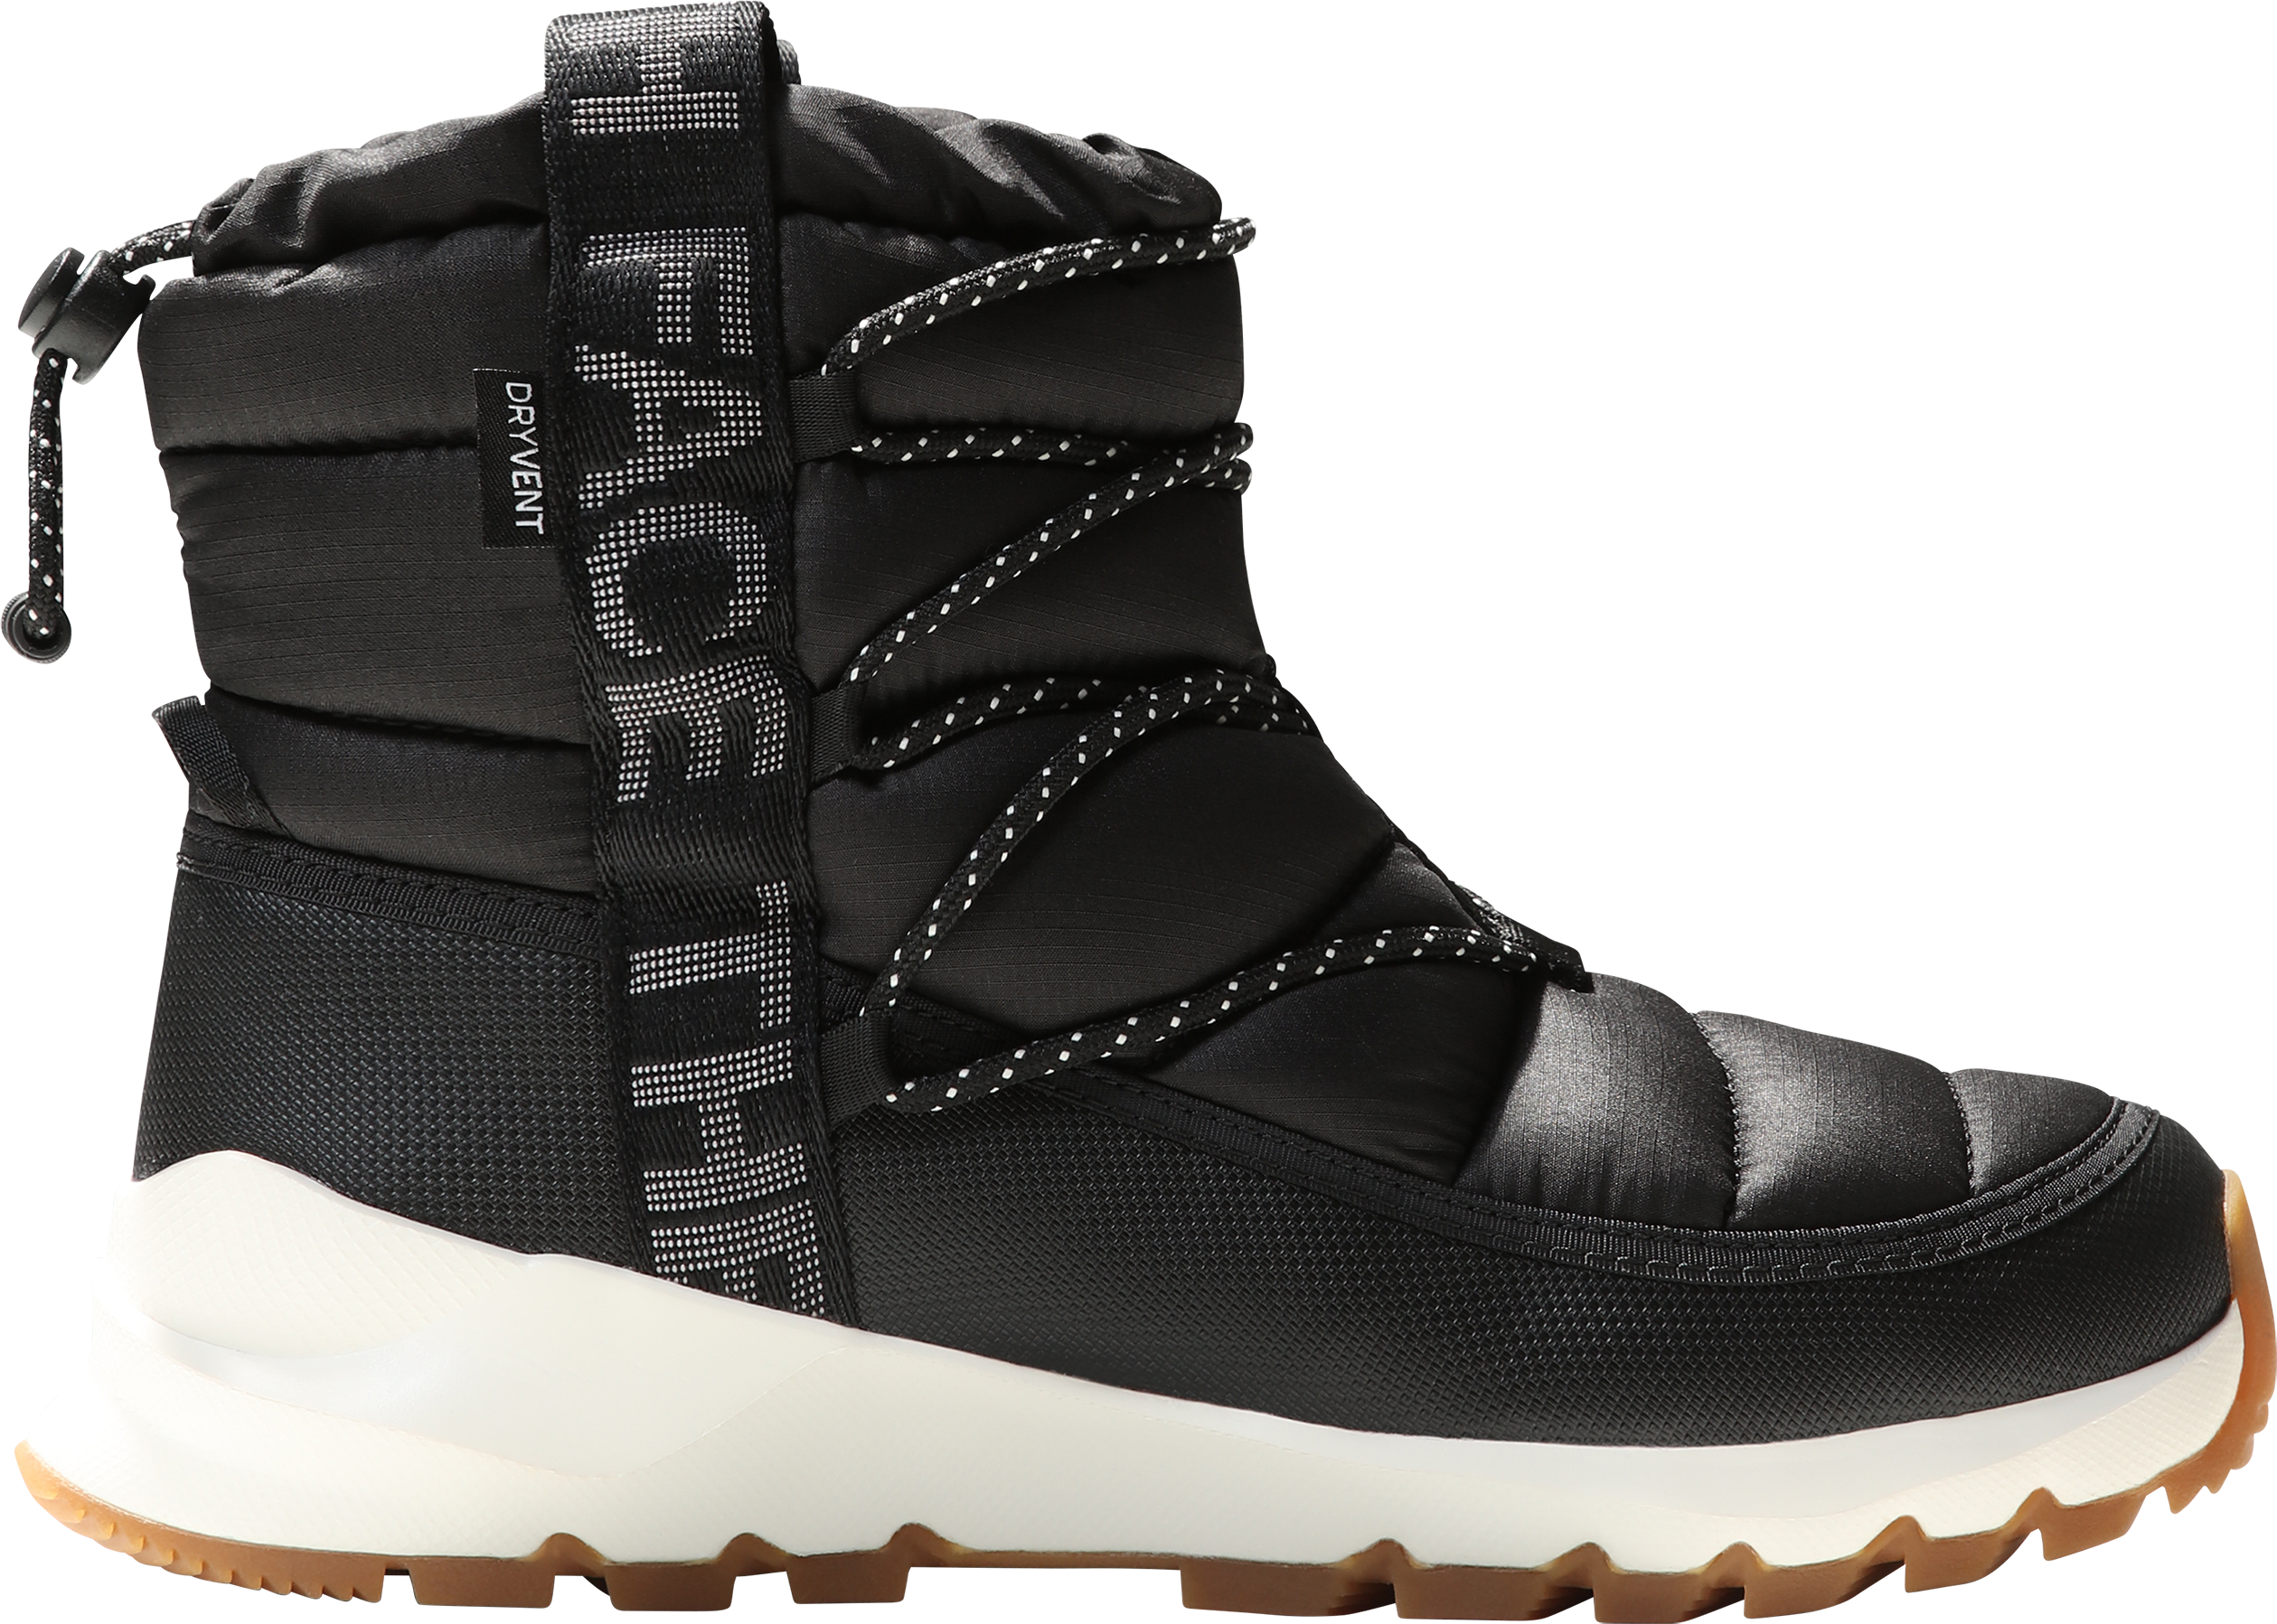 The Women's Thermoball Lace Up Waterproof fra